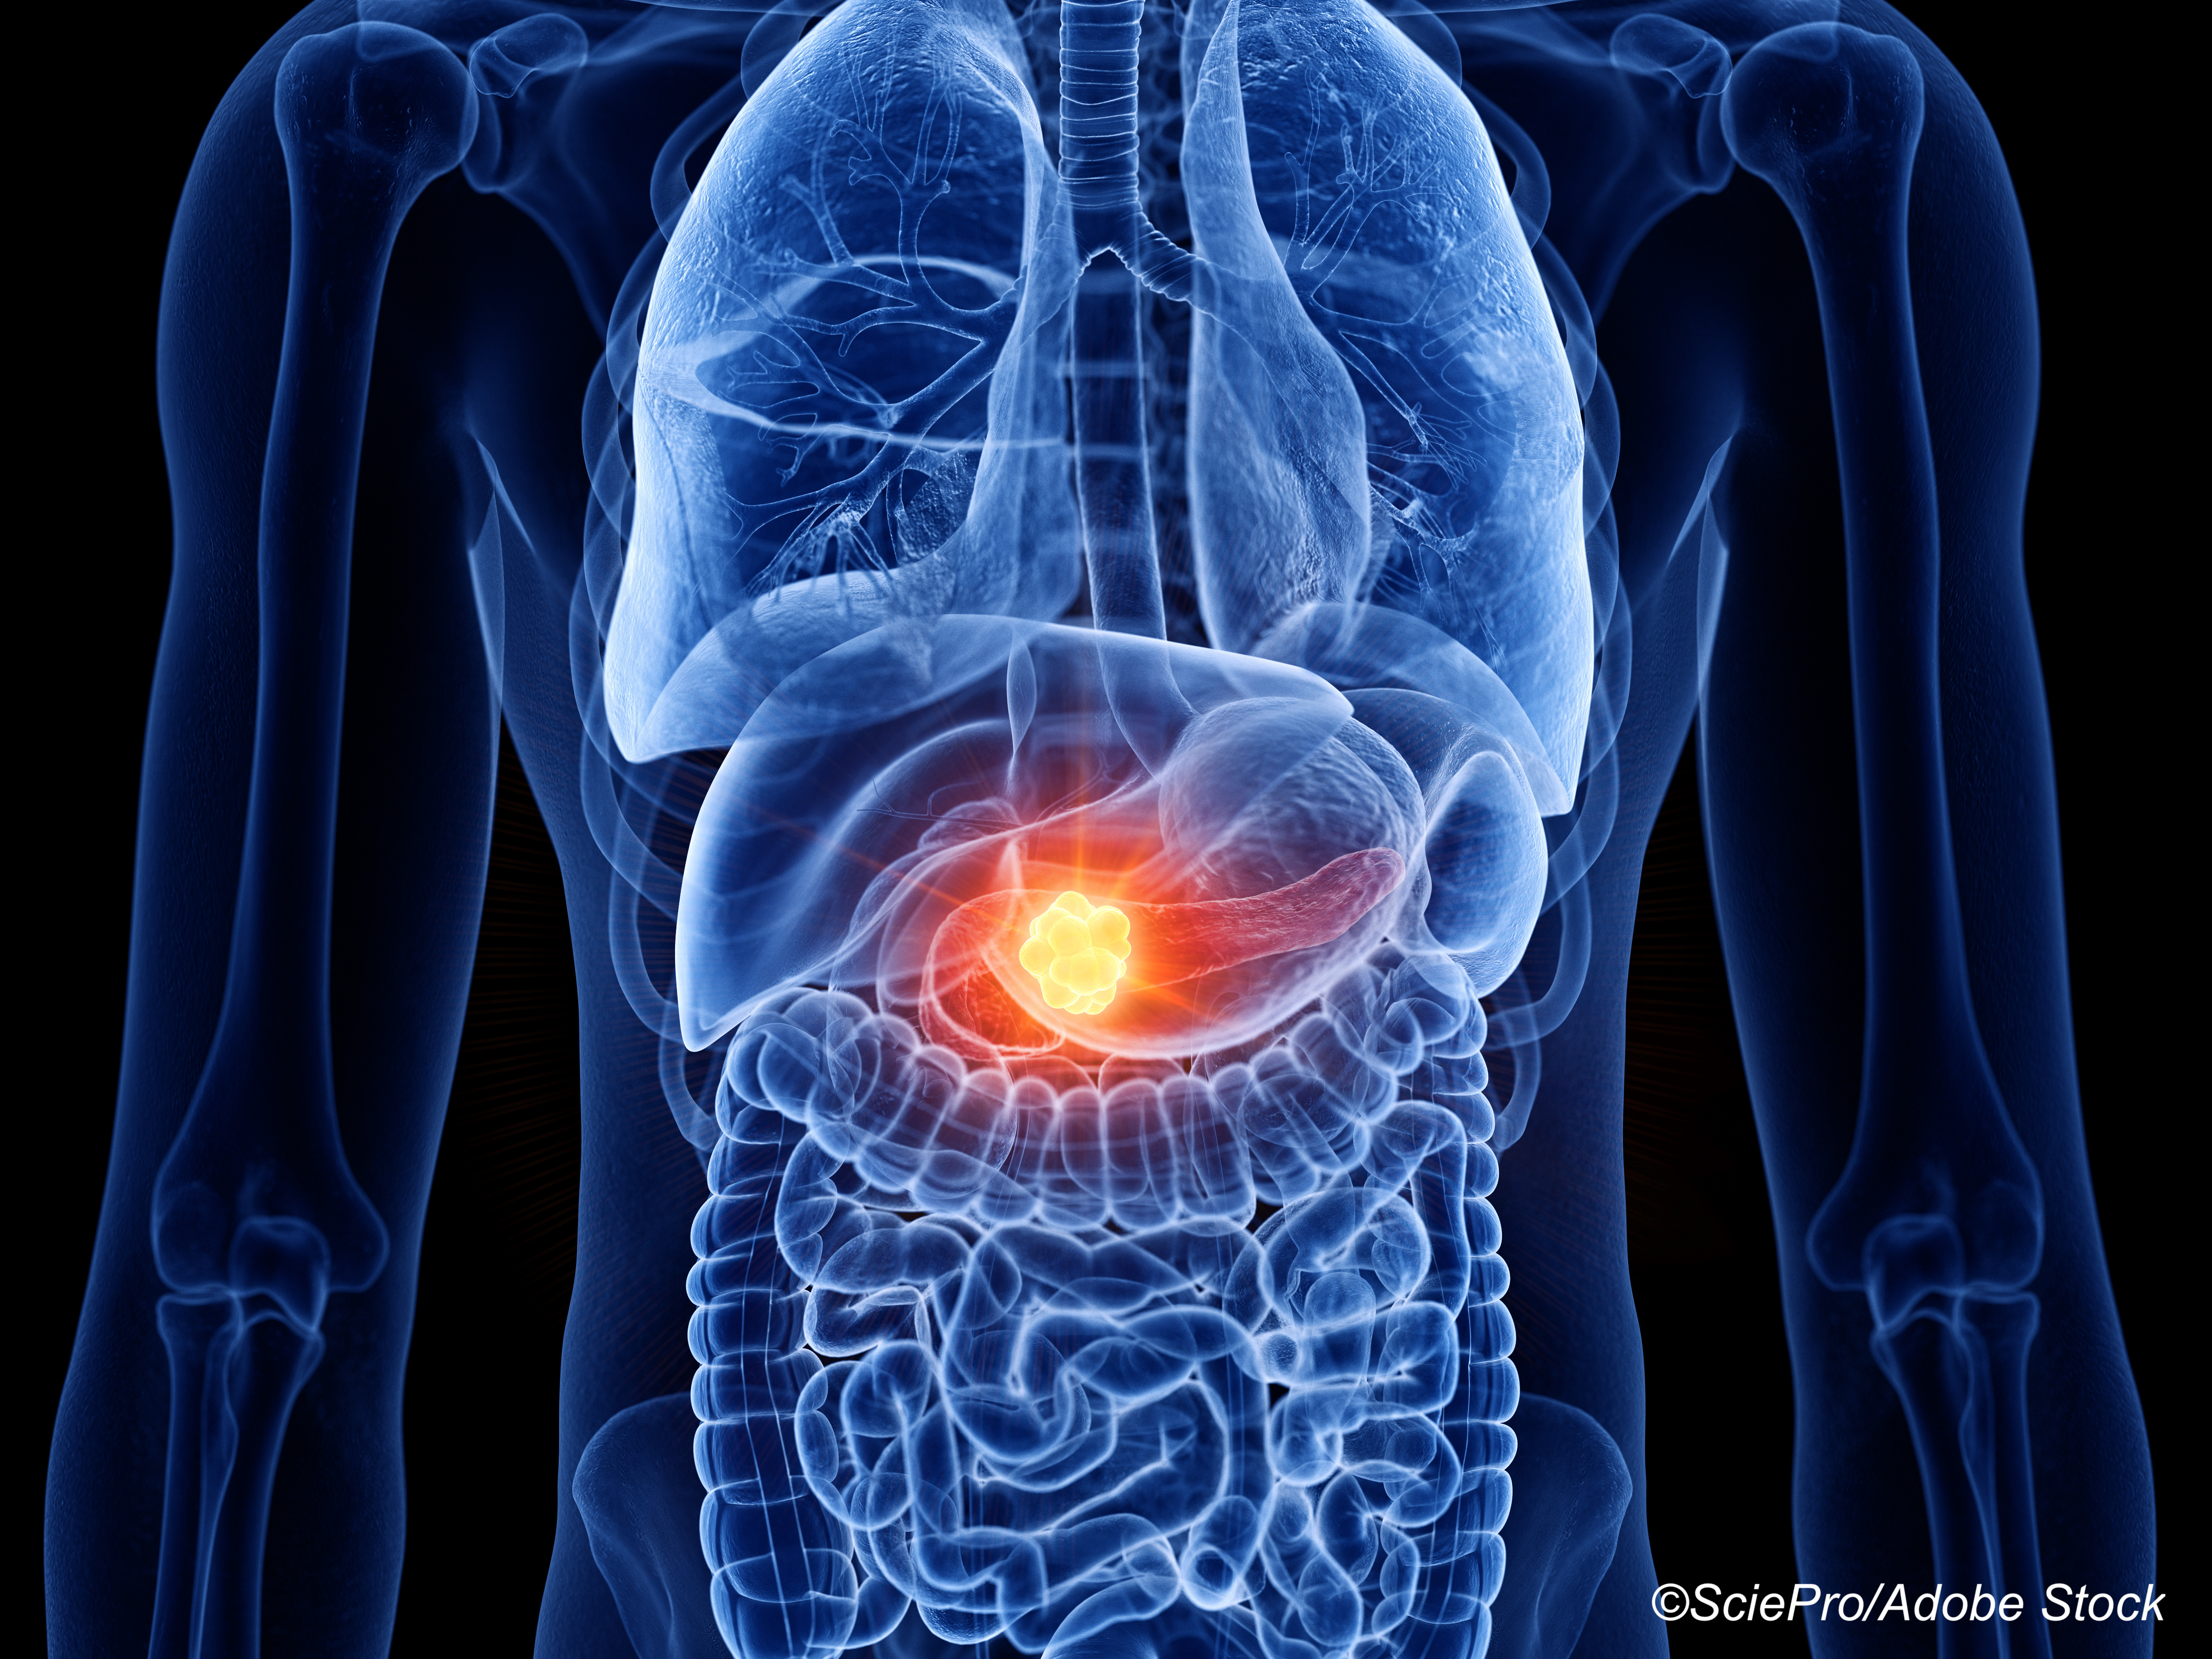 New Kind of T-Cell Therapy Promising Against Pancreatic Cancer